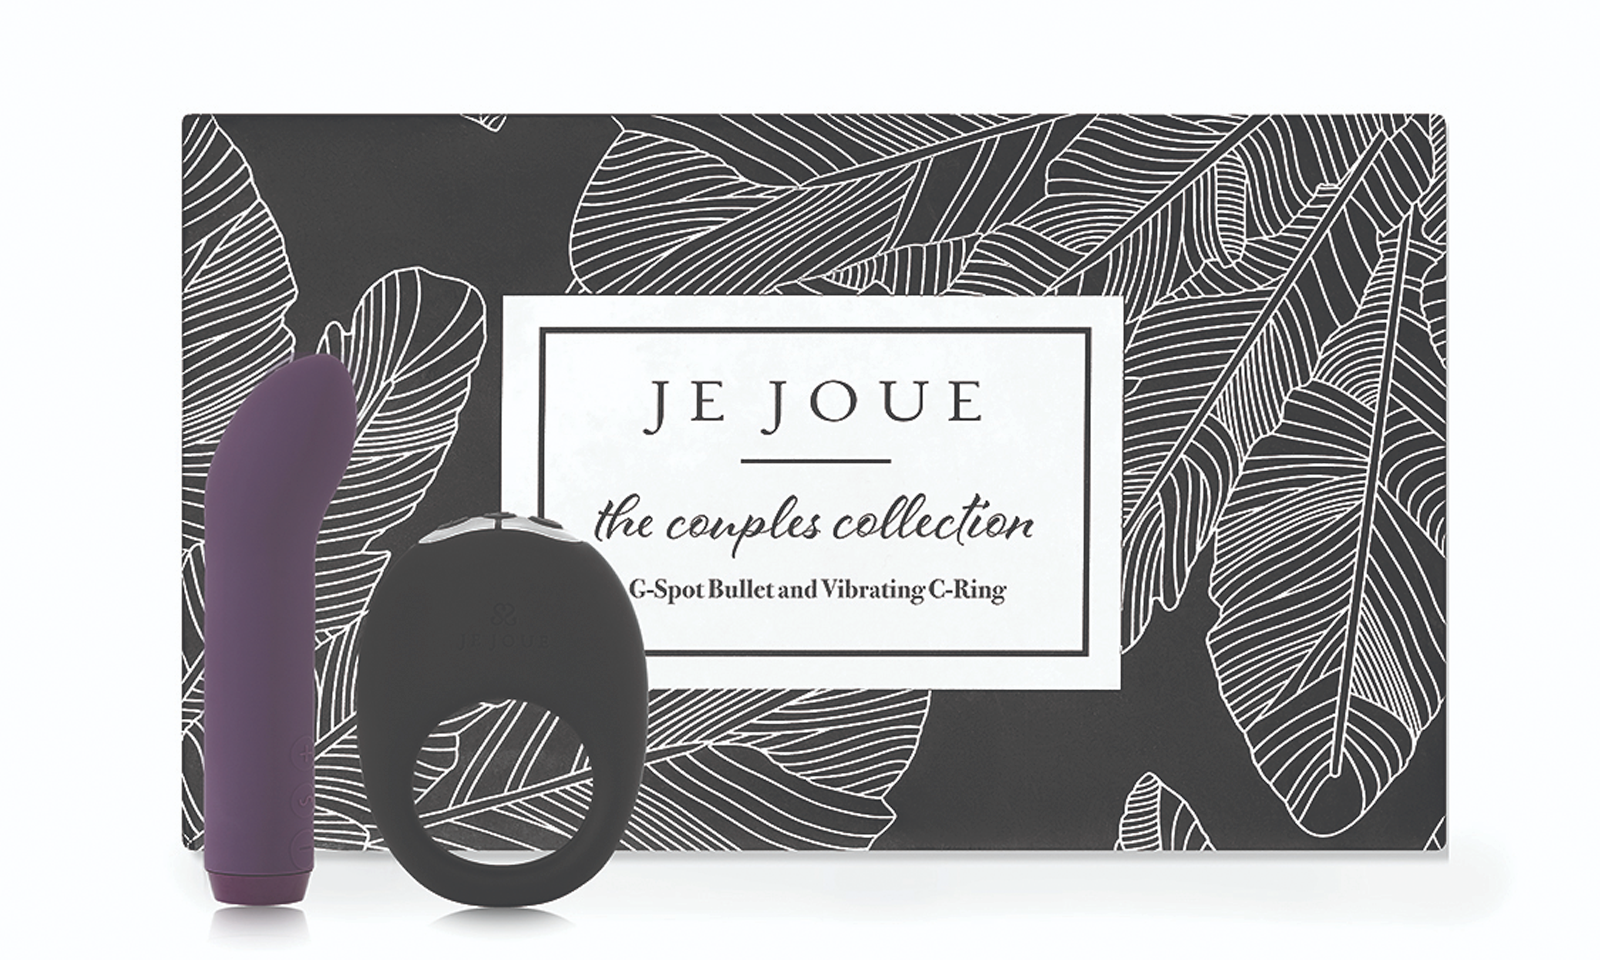 Entrenue Exclusive U.S. Distributor of New Items from Je Joue